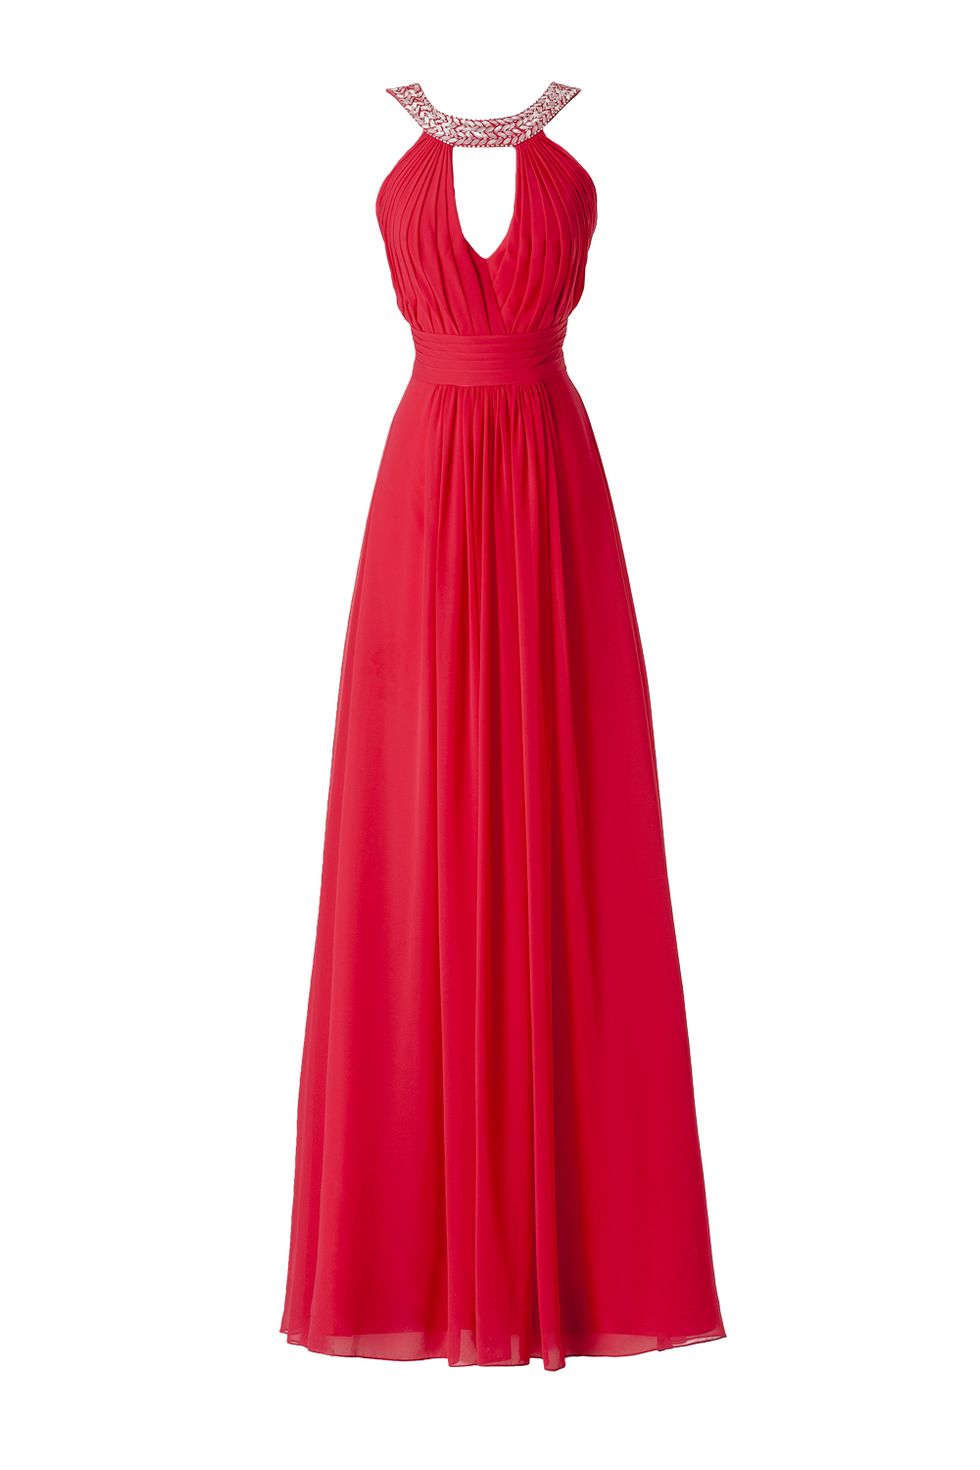 Clothing, Sleeve, Dress, Textile, Red, One-piece garment, Formal wear, Gown, Costume design, Magenta, 